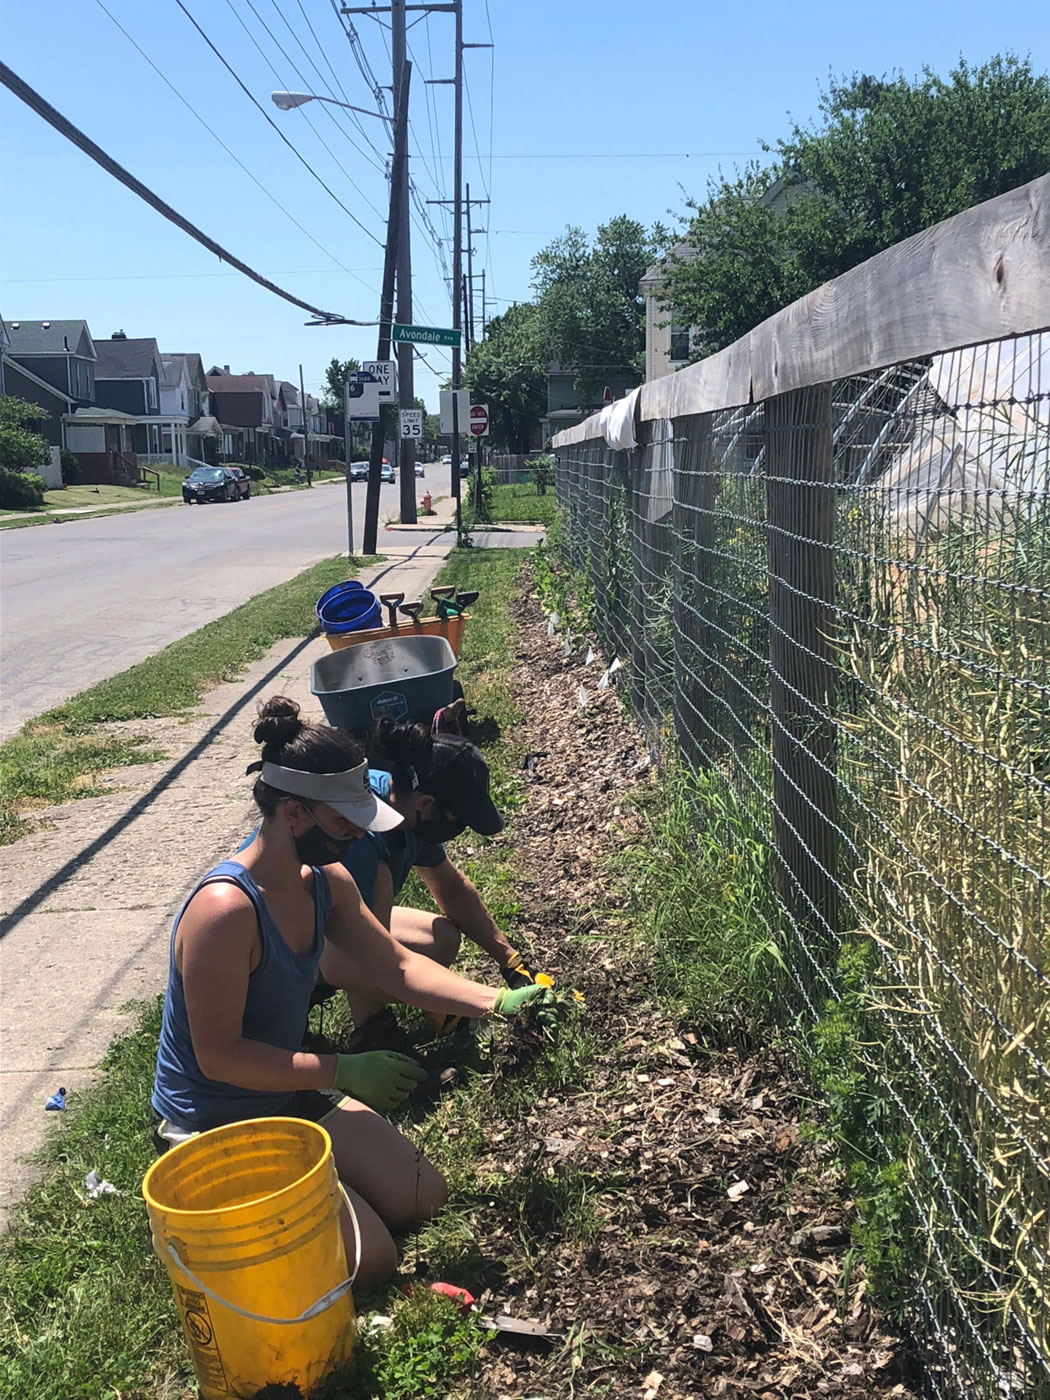 Volunteers clean up along a fence at Franklinton Farms. Photo by Edible Columbus.